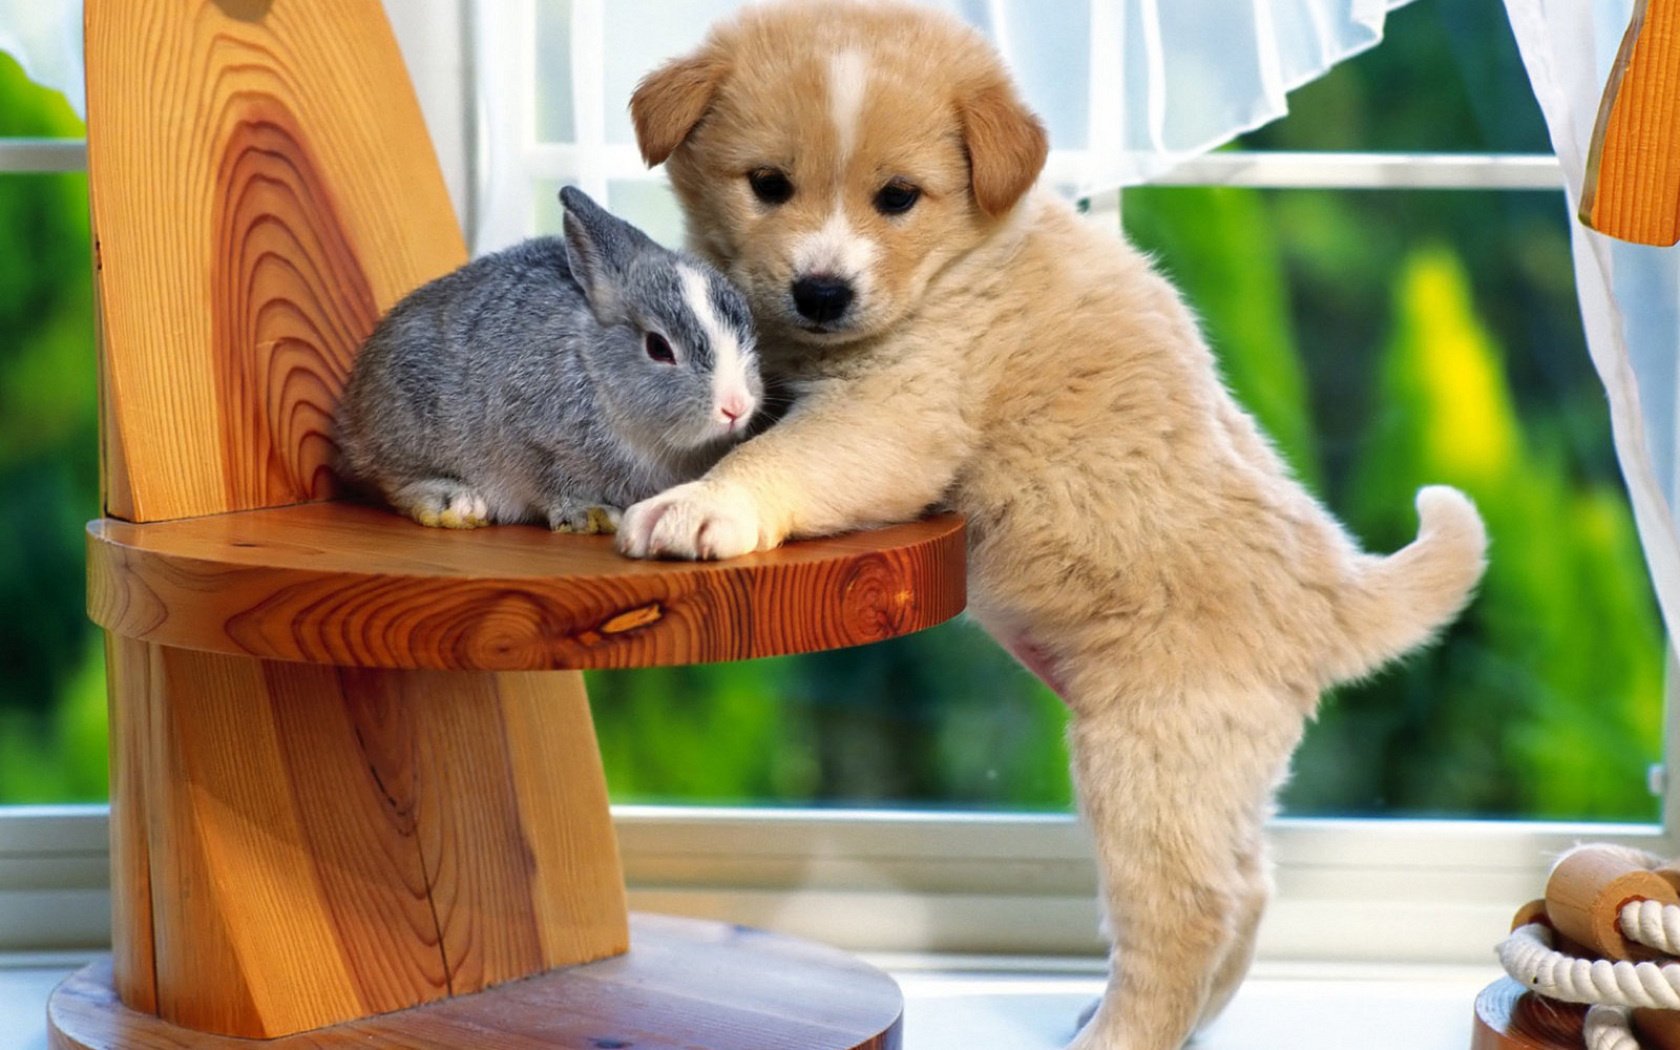 A dog and a gray rabbit on a stool